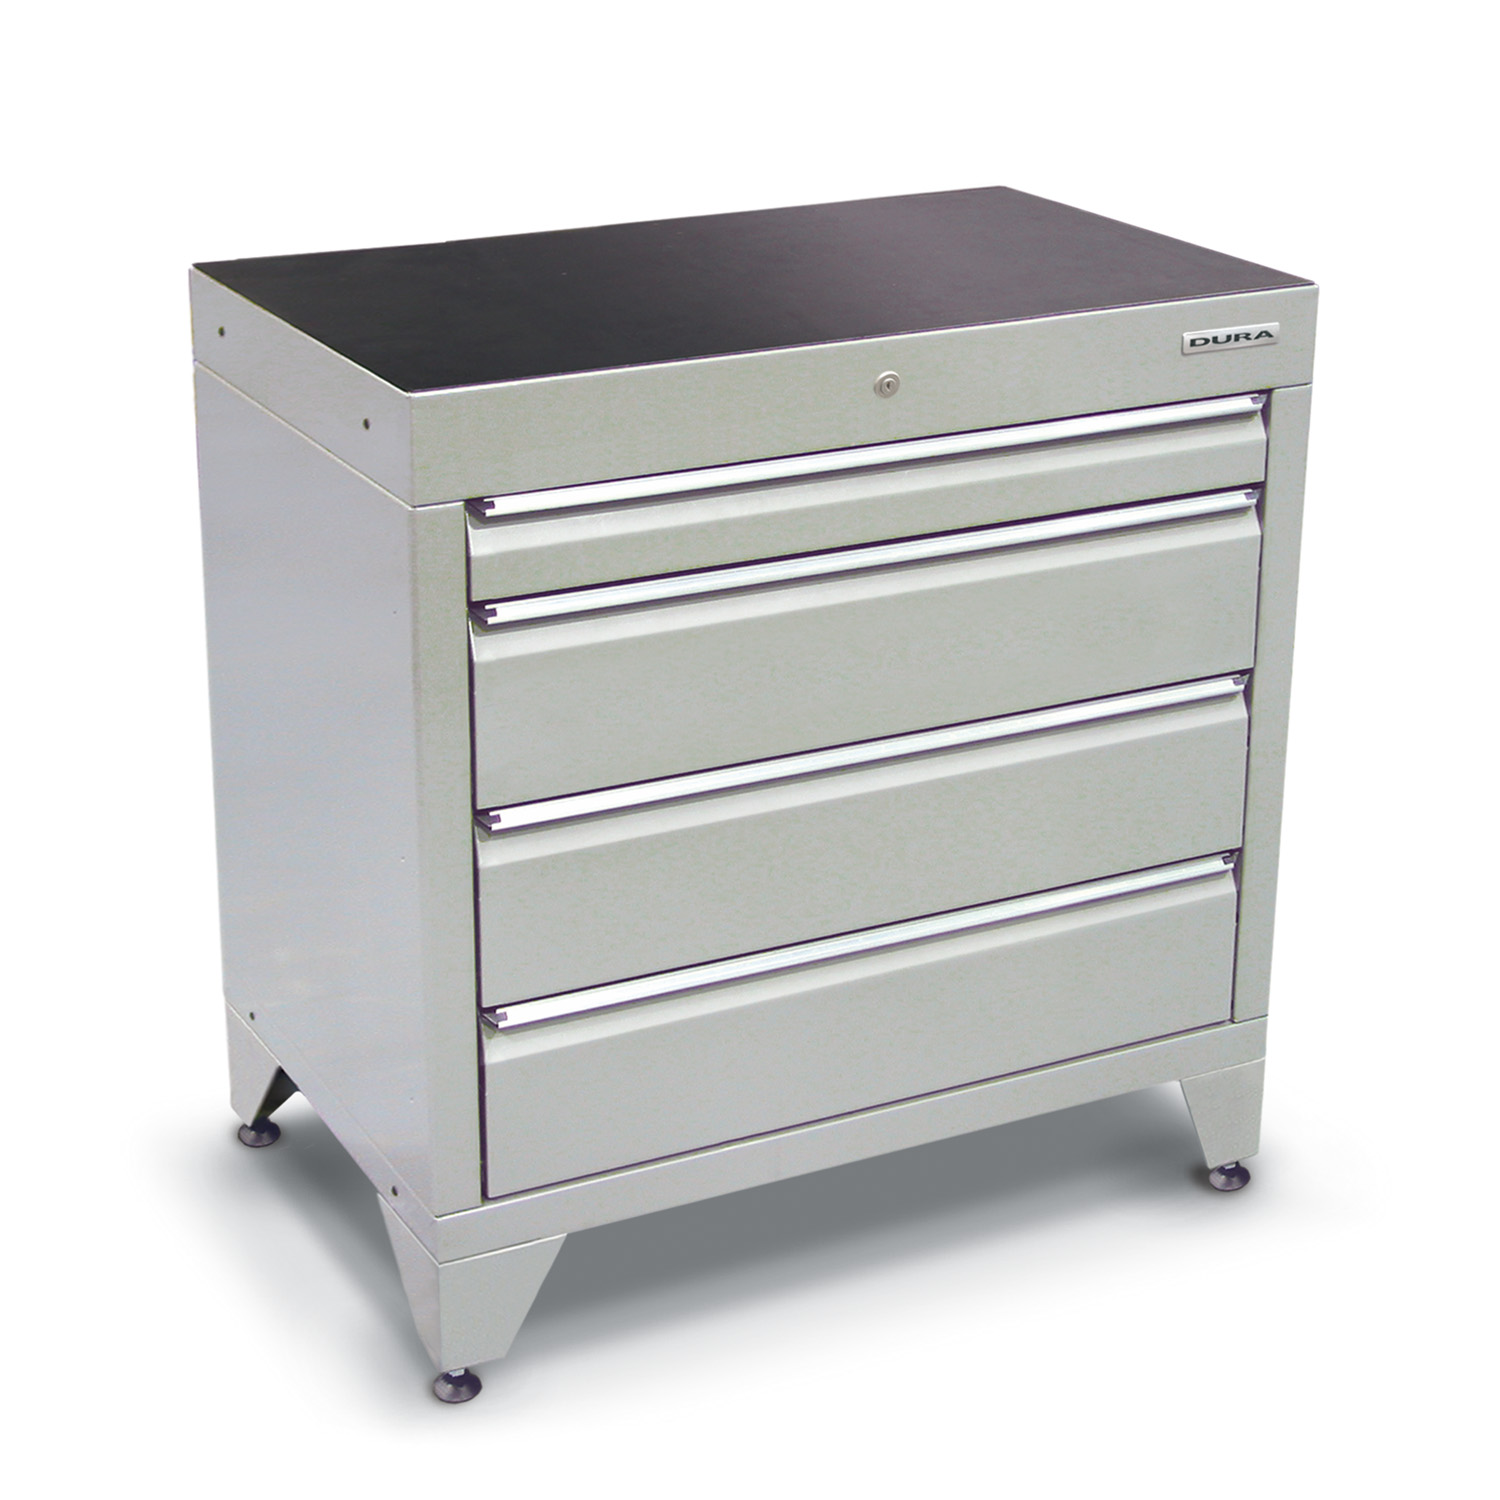 900 series cabinet with 4 drawers (1 medium, 3 large) and feet